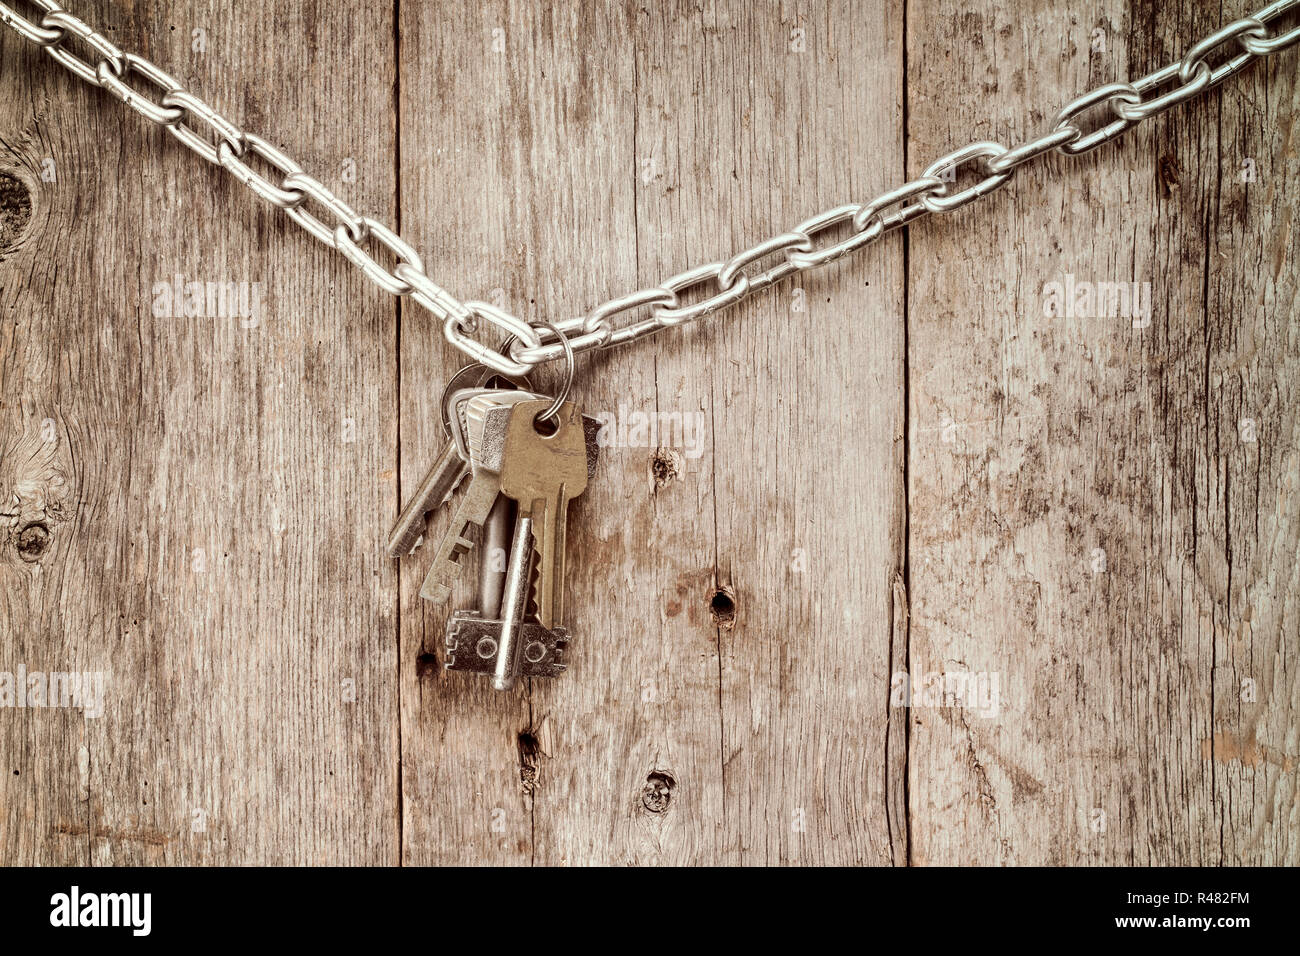 Bunch of keys hanging on chain. Stock Photo